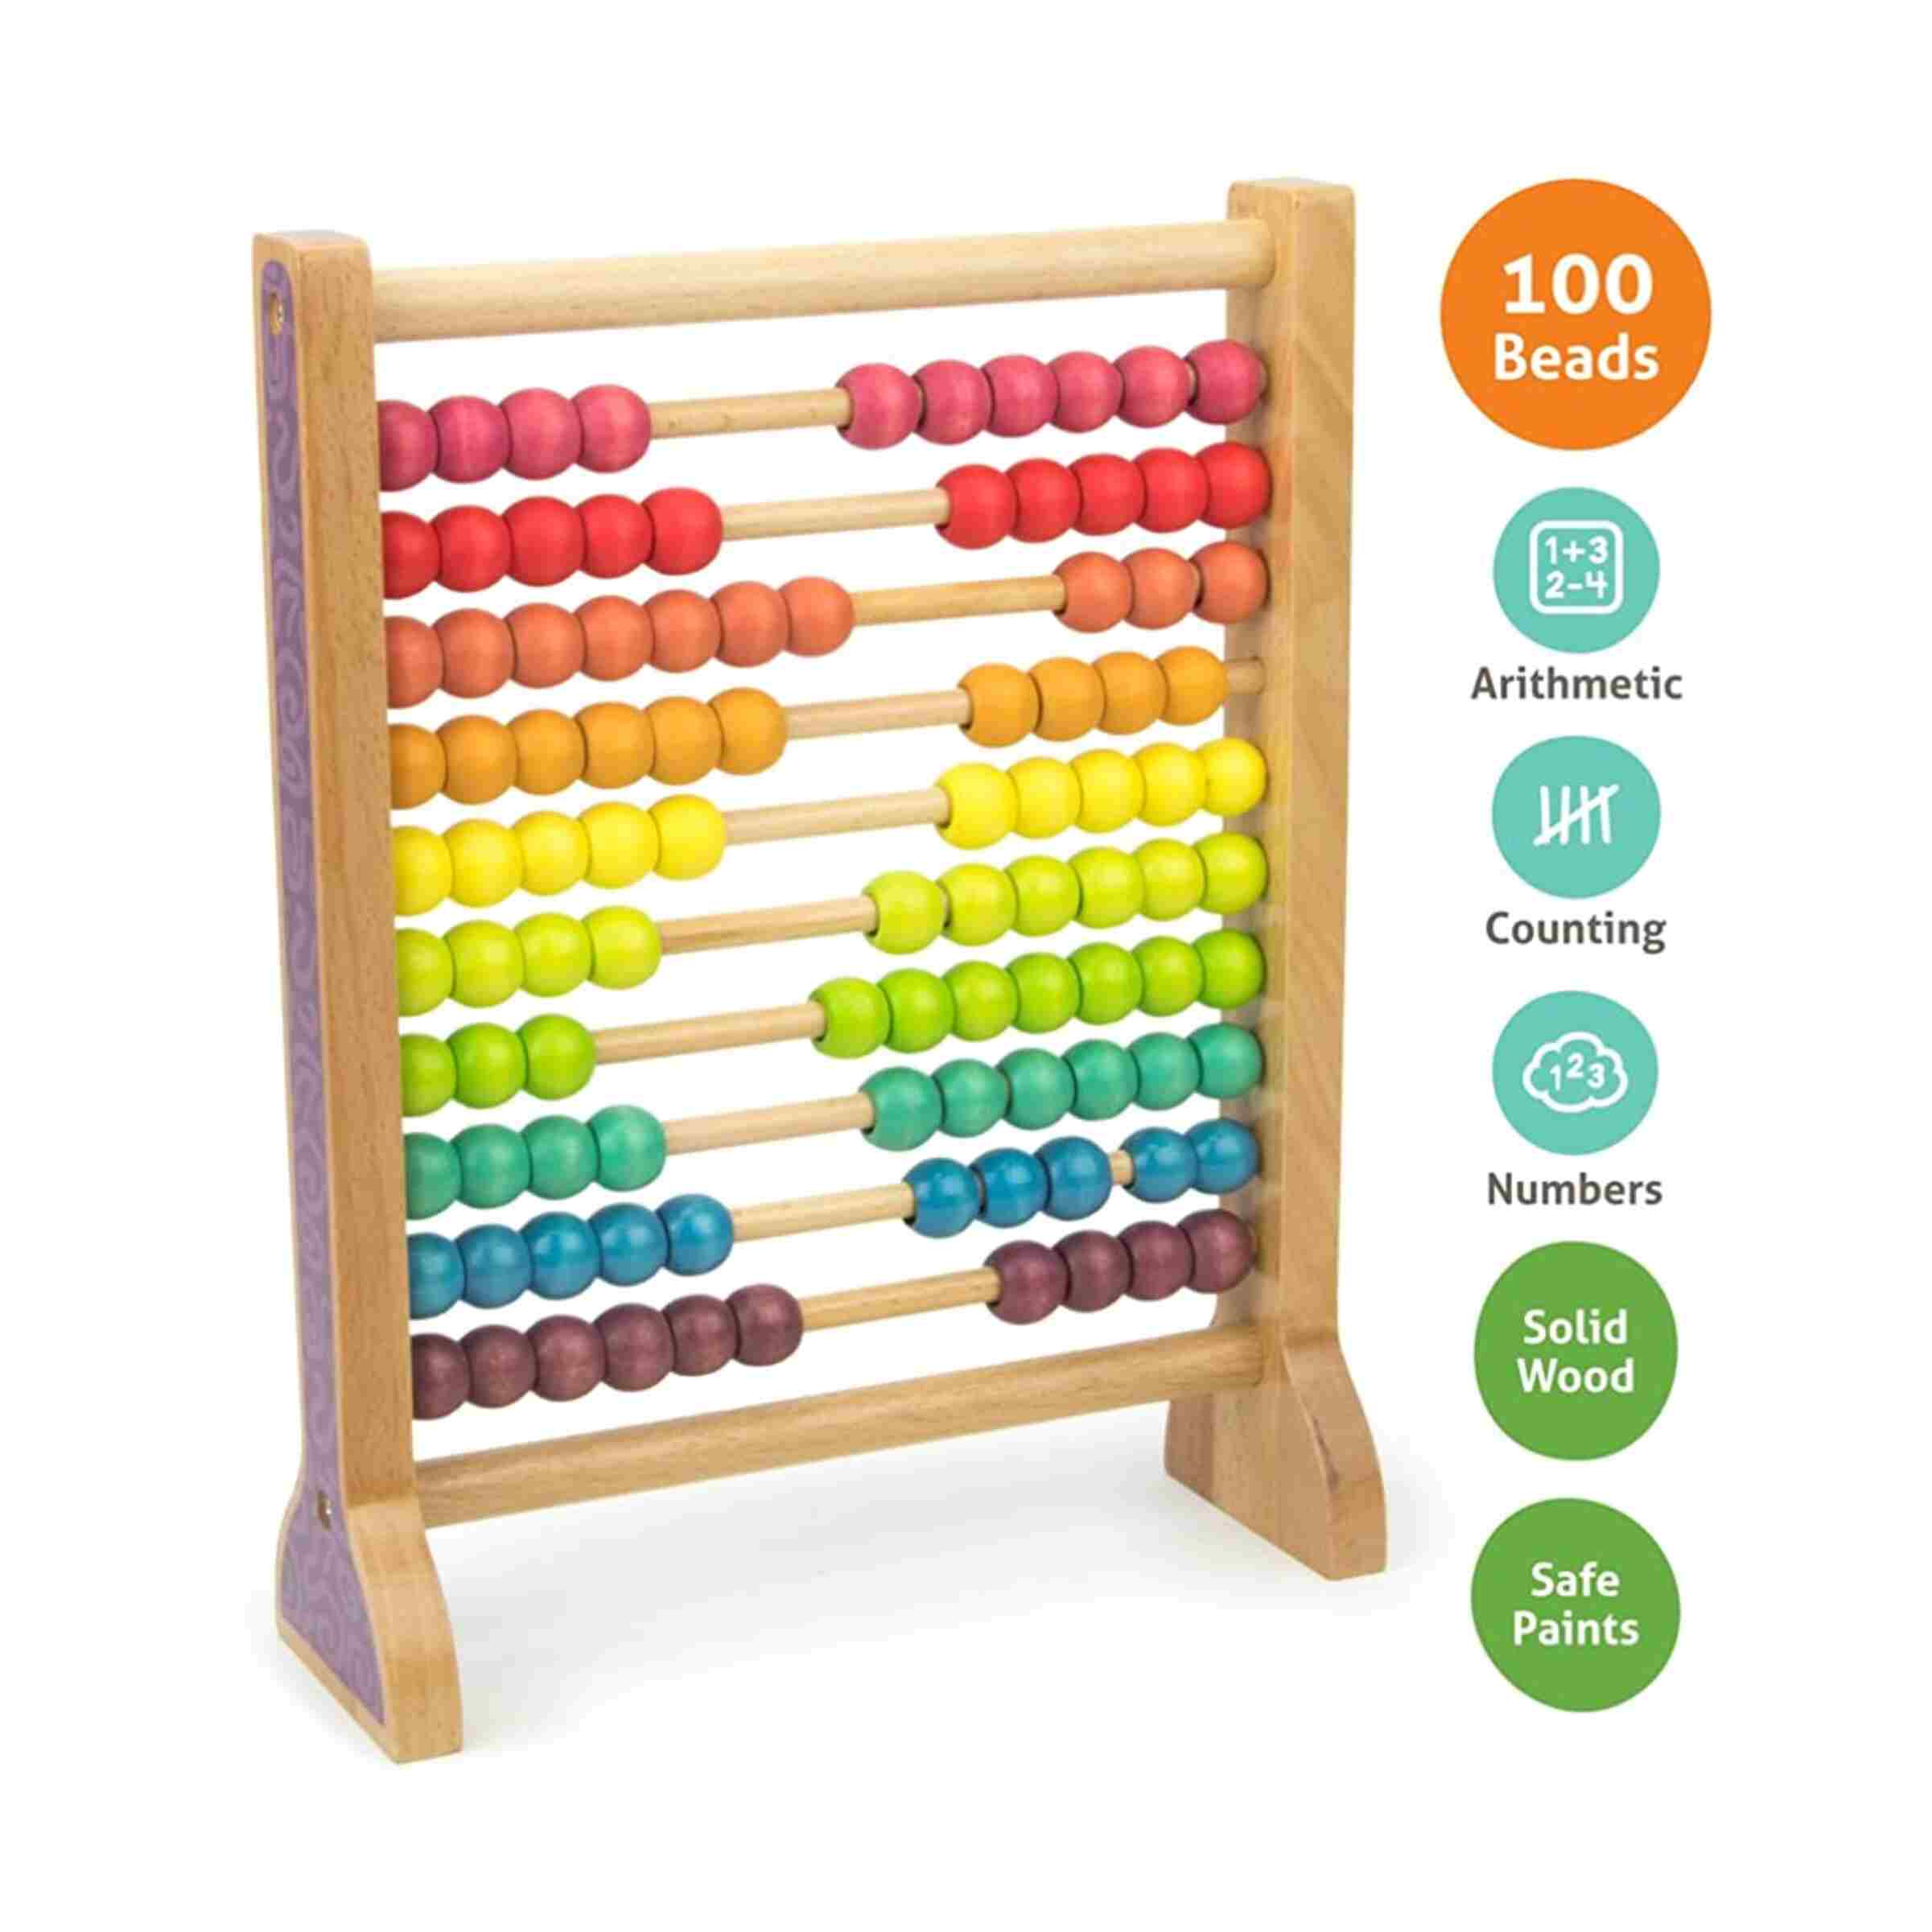 Buy Wooden Educational Toys for Kids at Best Prices Online in Pakistan